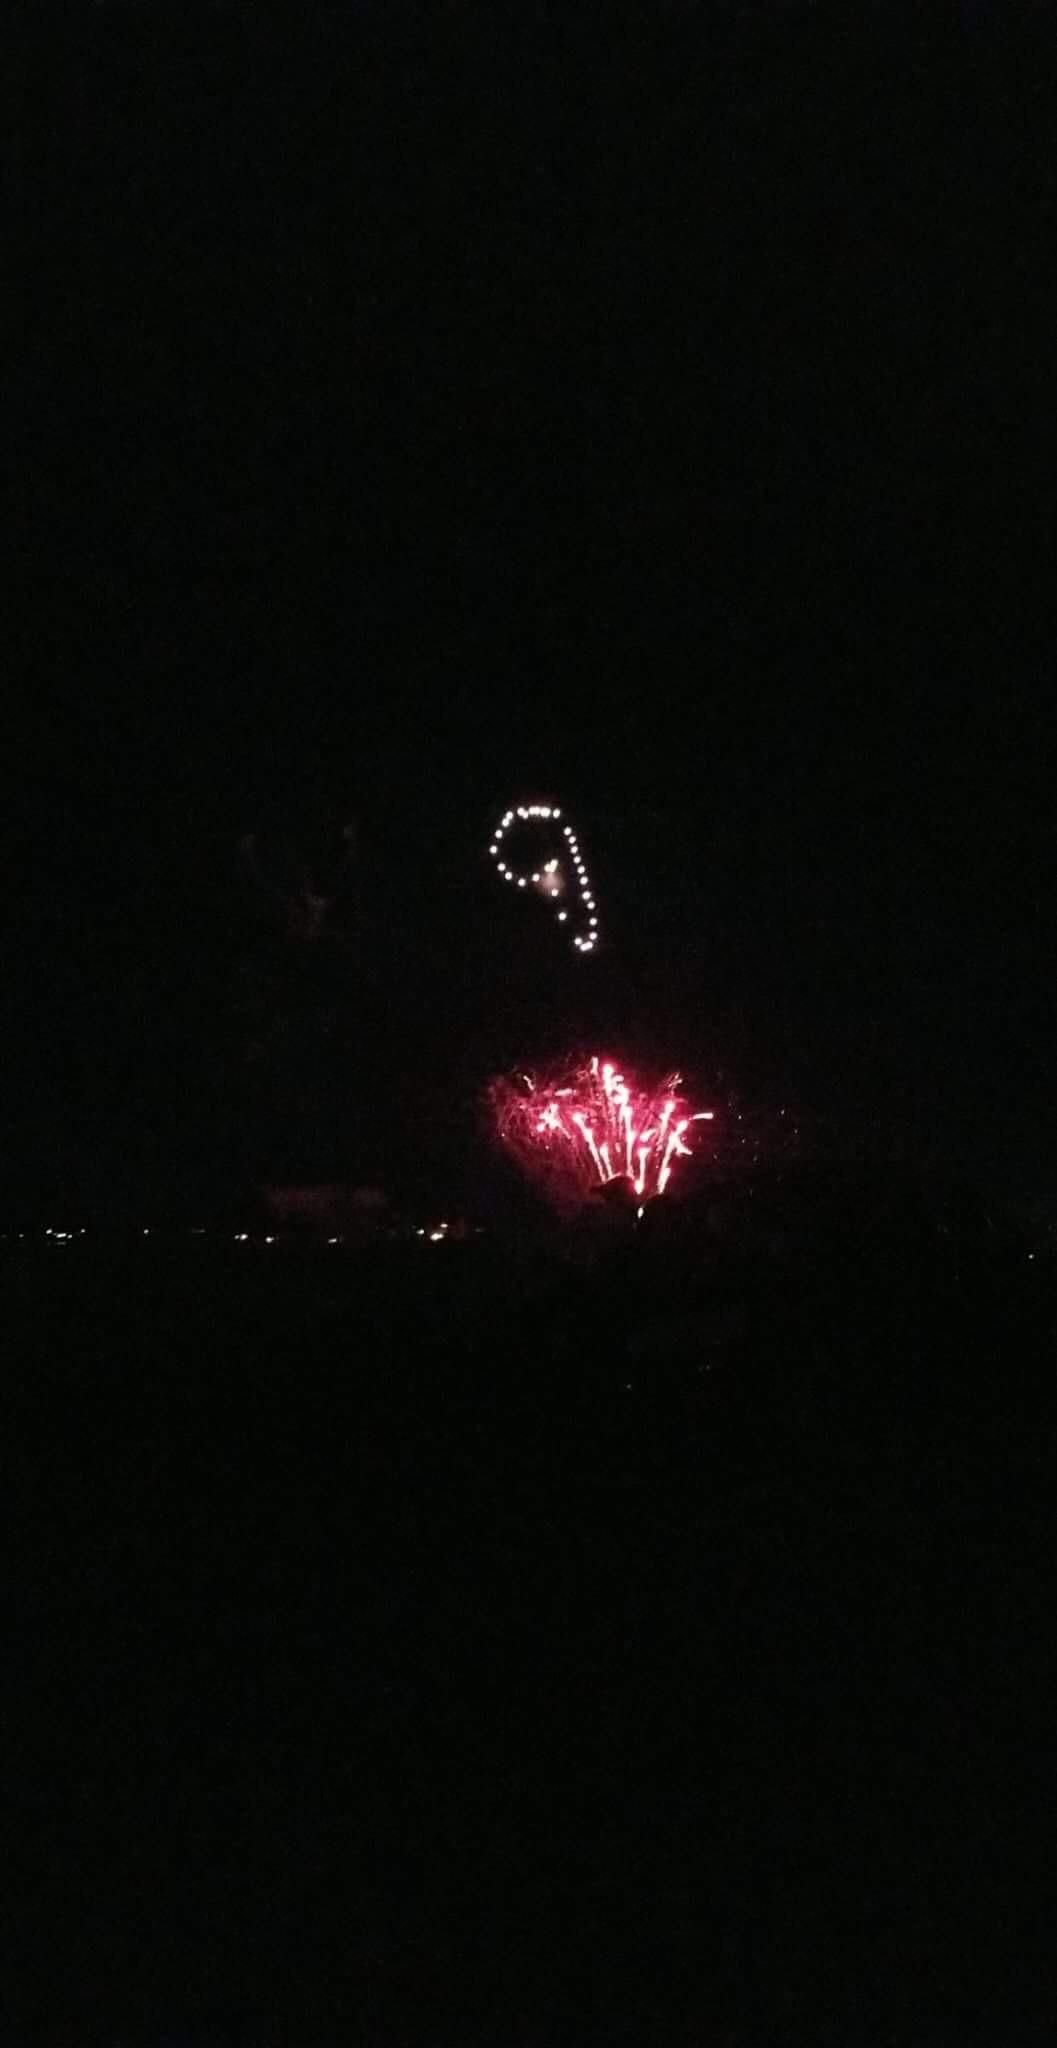 Town had heart shaped fireworks for an event tonight but they were all upside down so it looked like penises all over the sky.